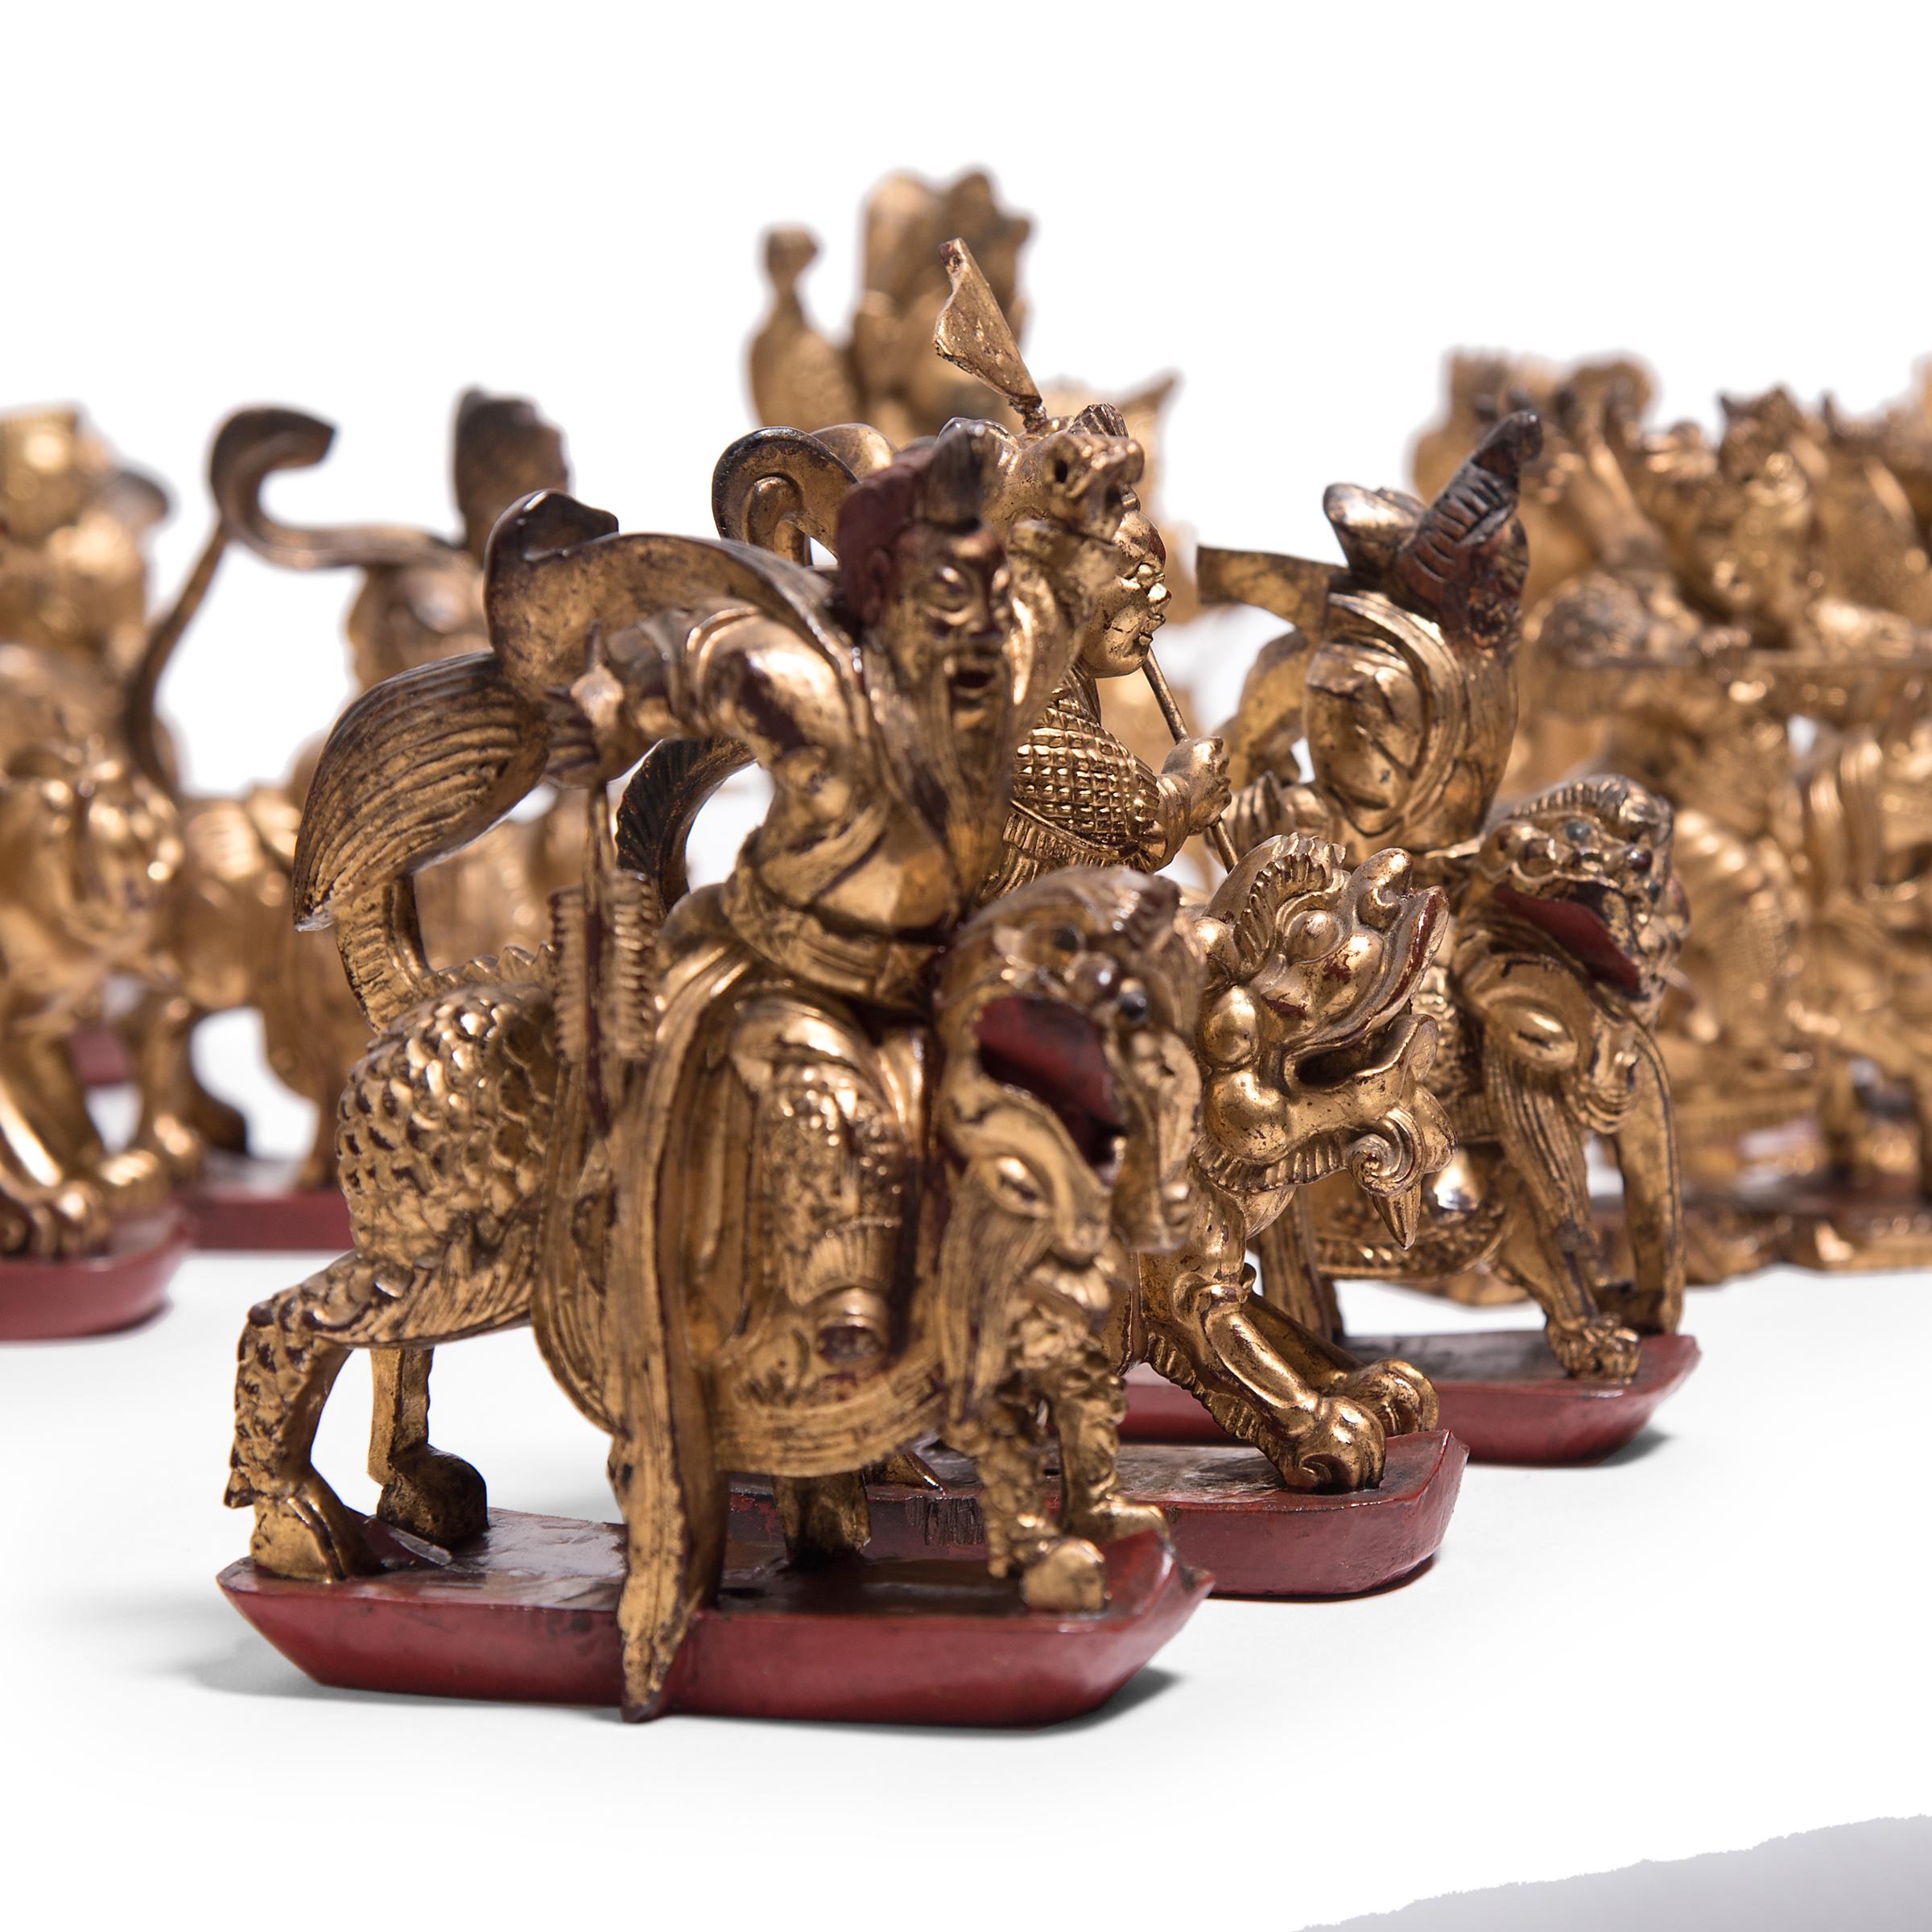 19th Century Chinese Mythical Gilt Figure with Divine Steed, circa 1850